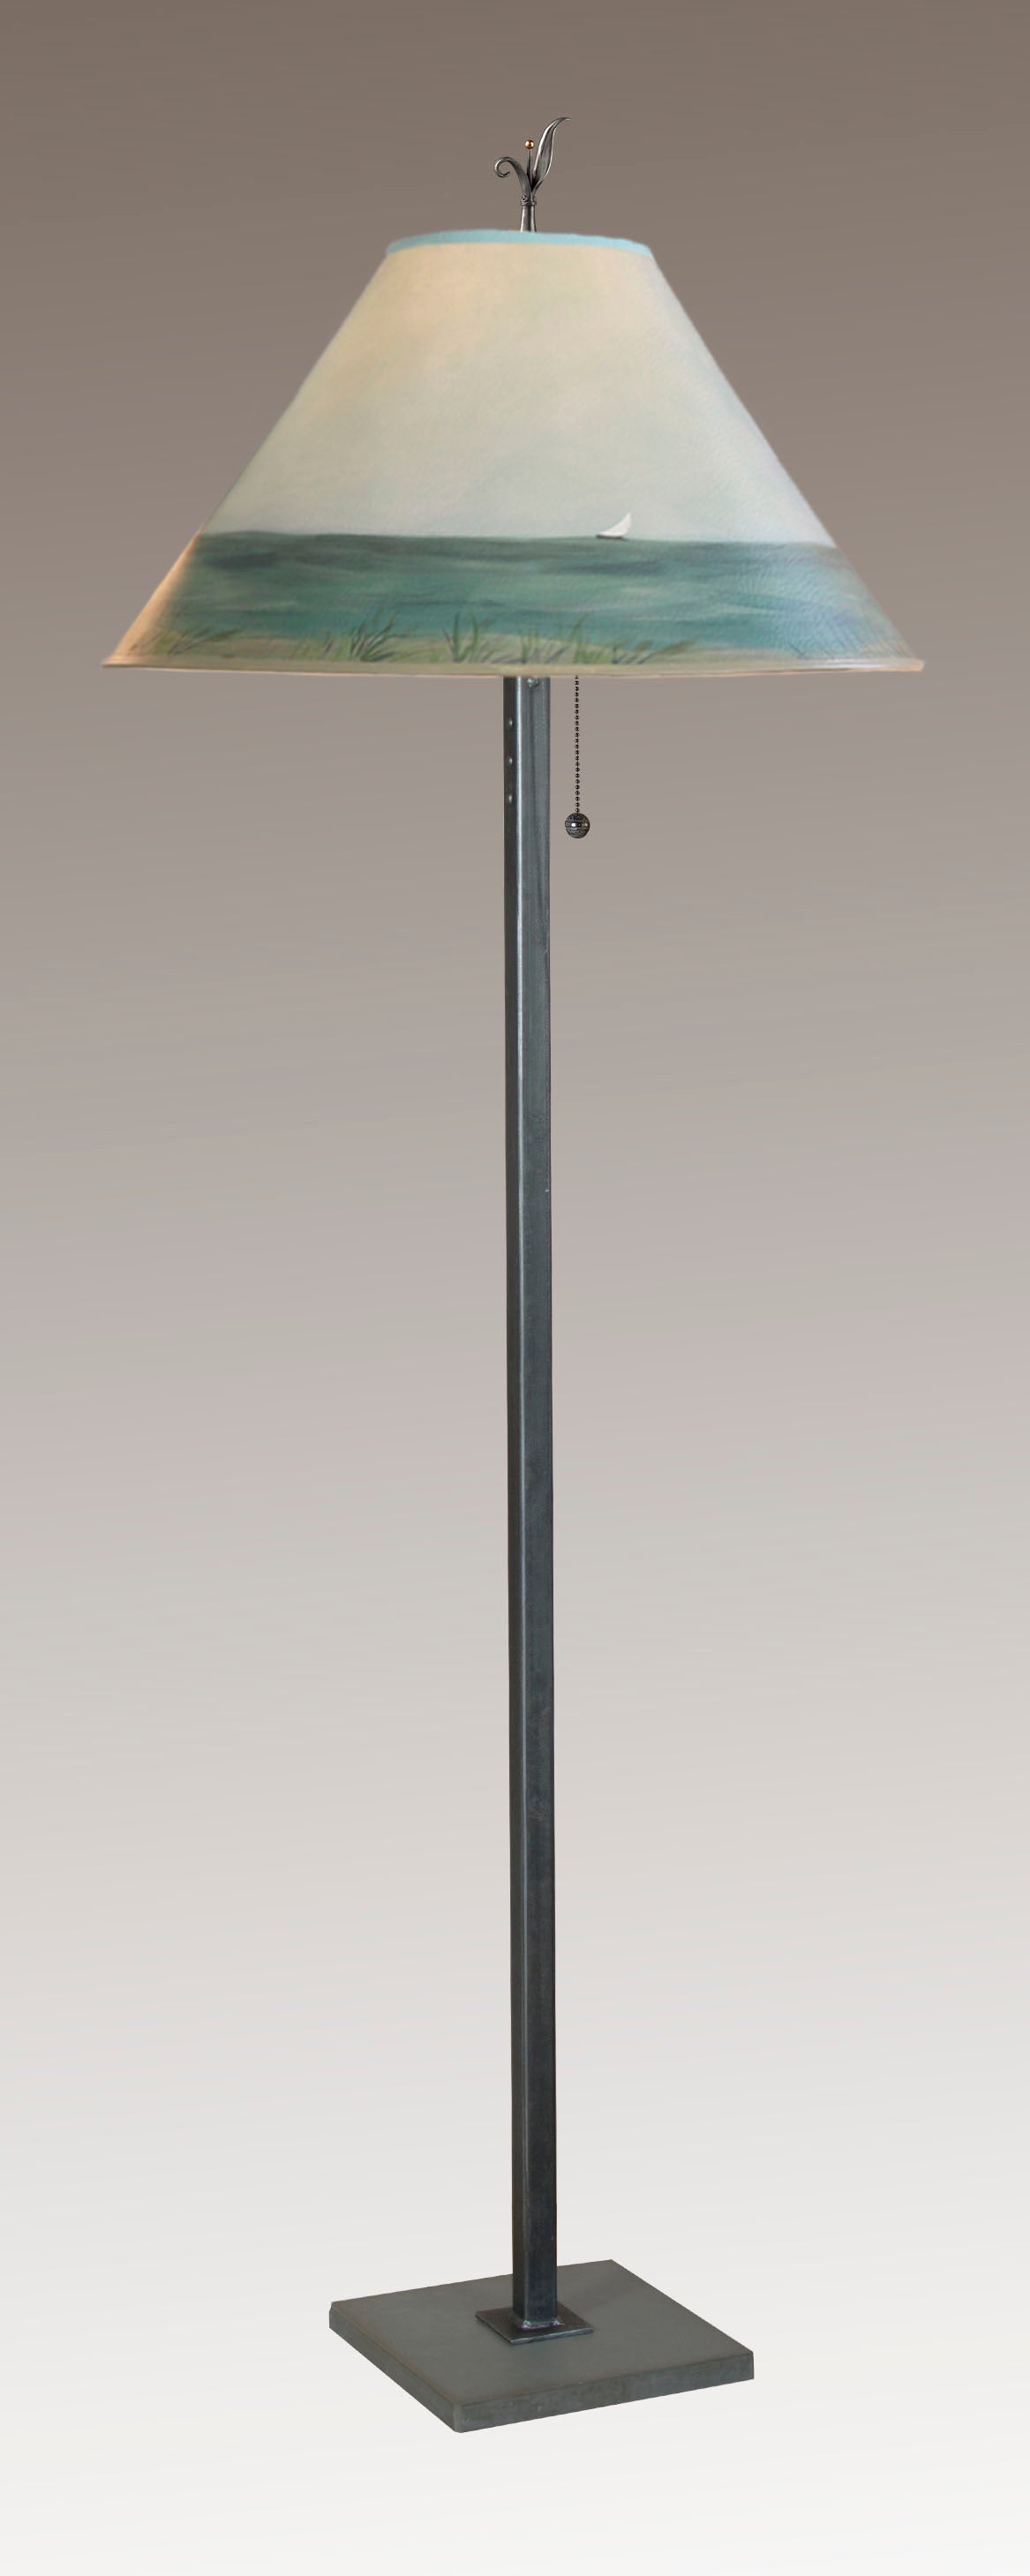 Steel Floor Lamp with Large Conical Shade in Shore